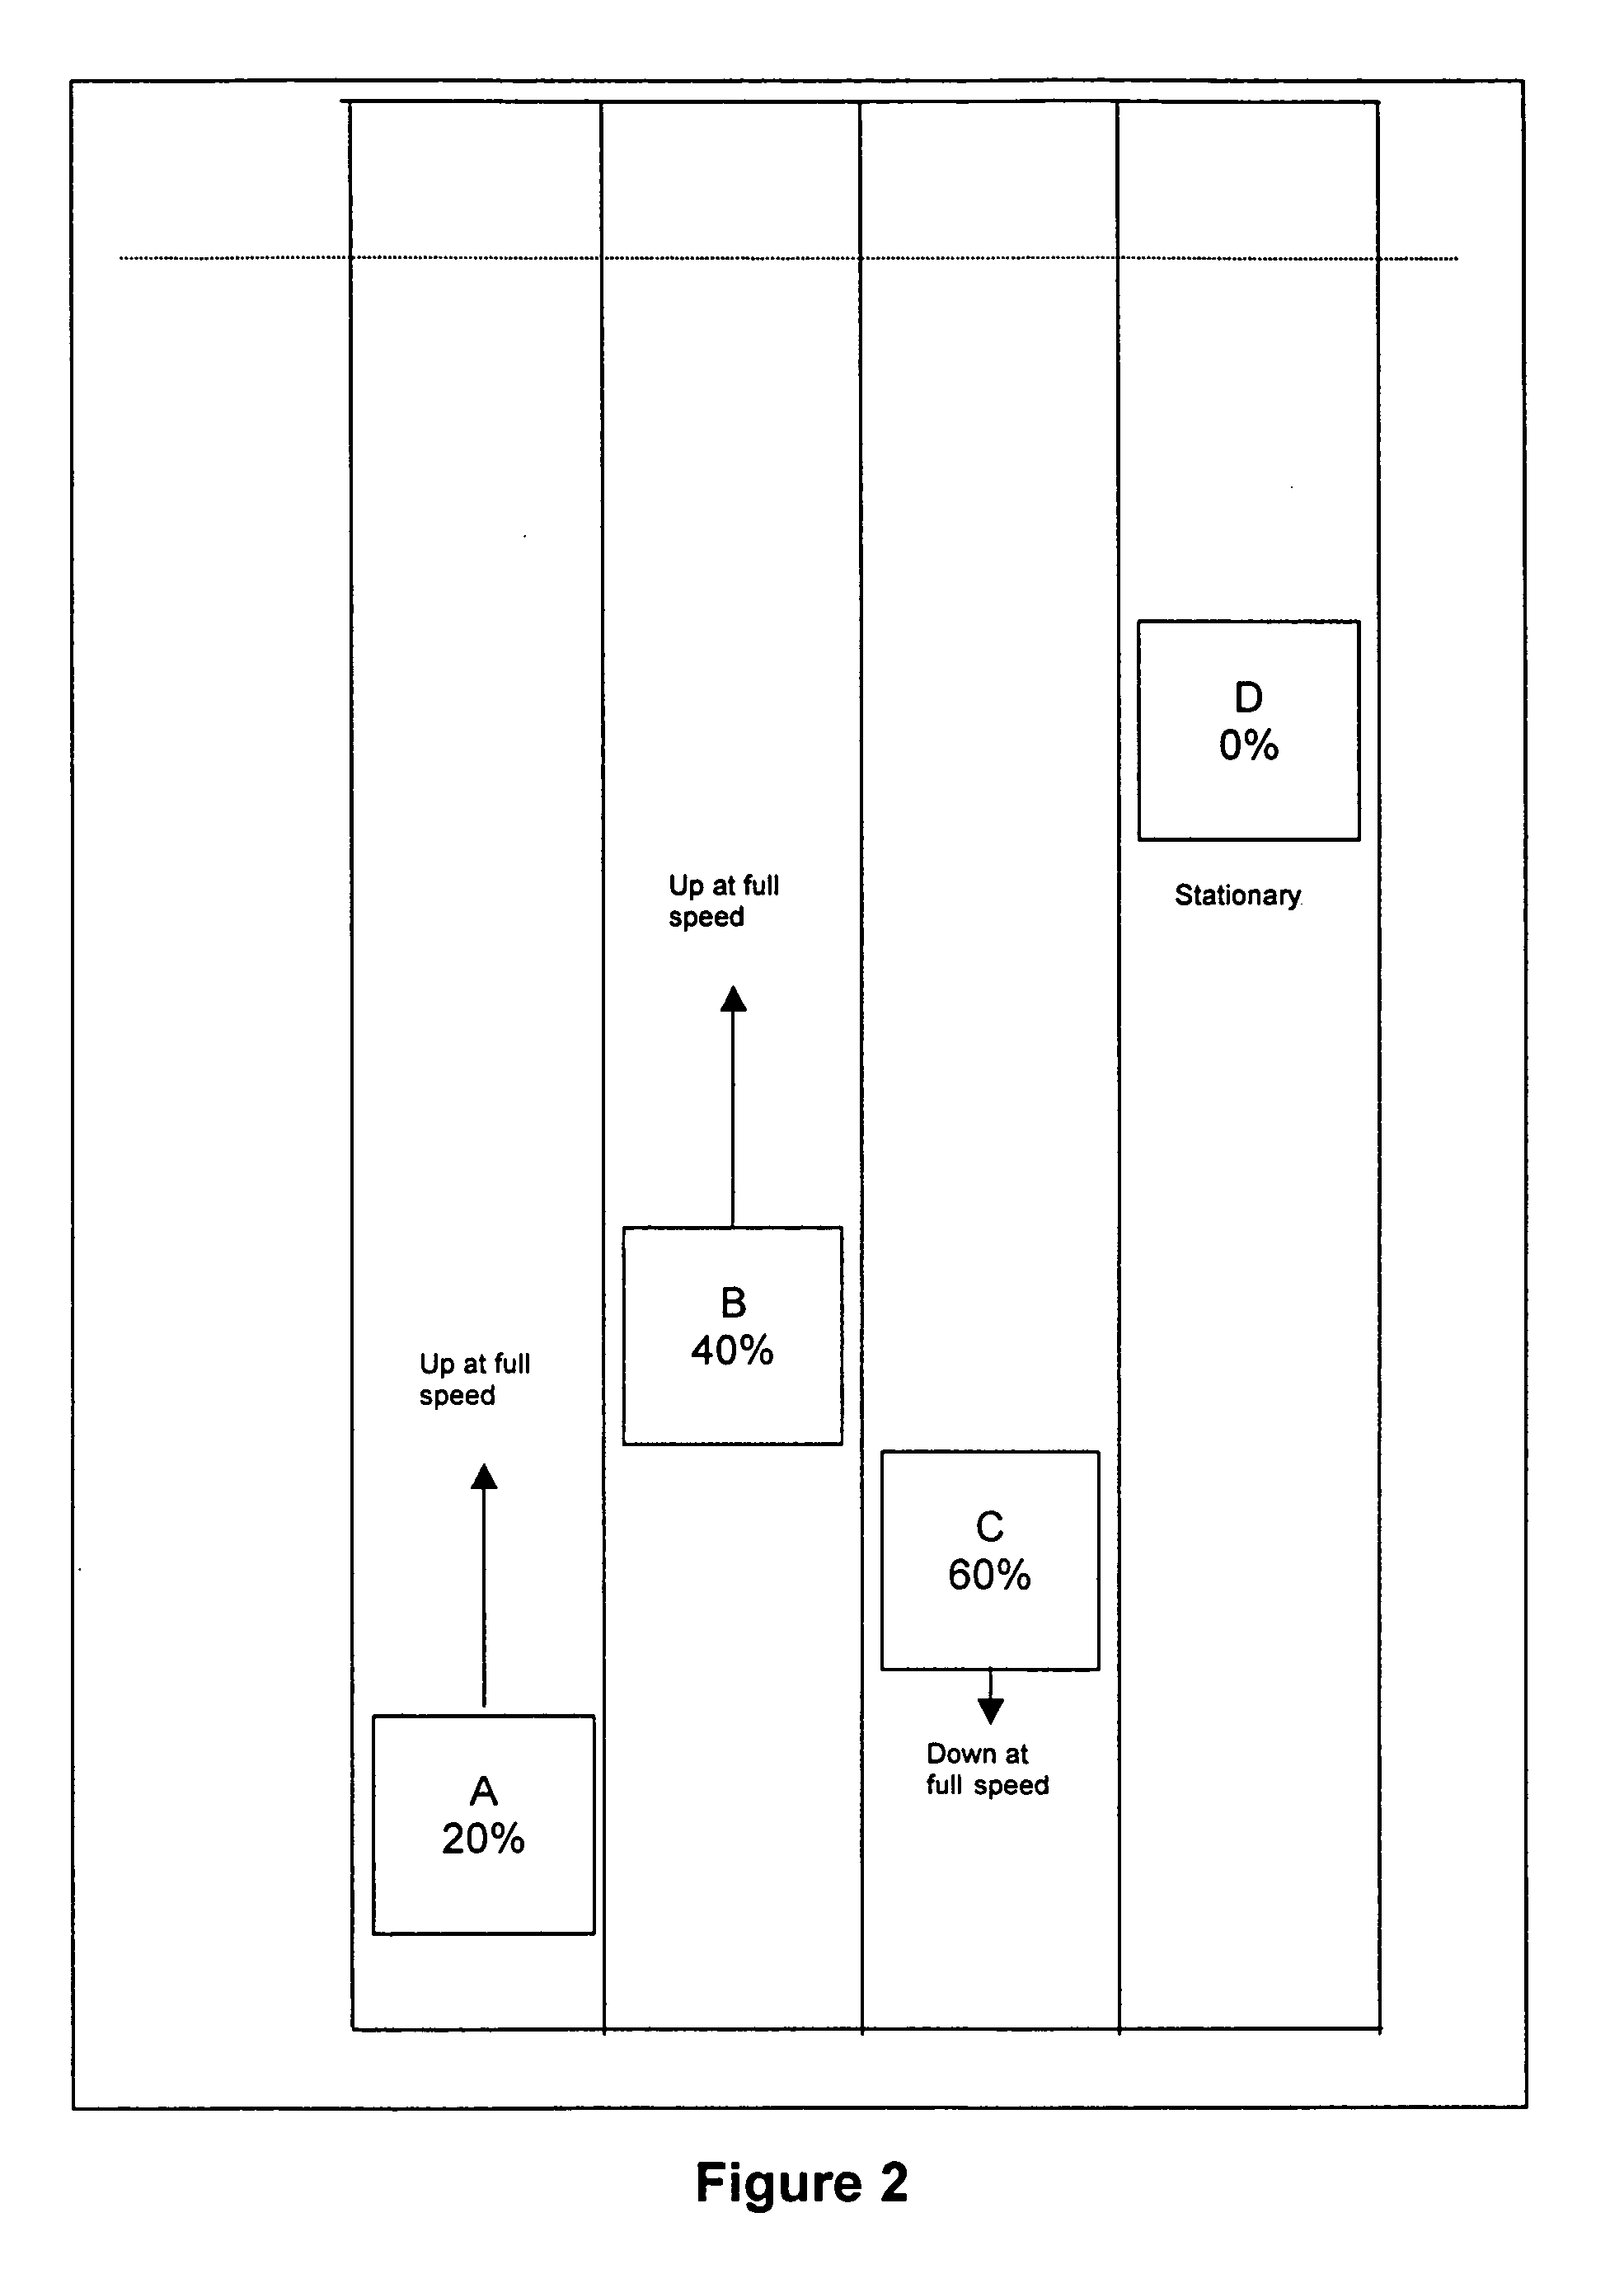 Method and apparatus to prevent or minimize the entrapment of passengers in elevators during a power failure